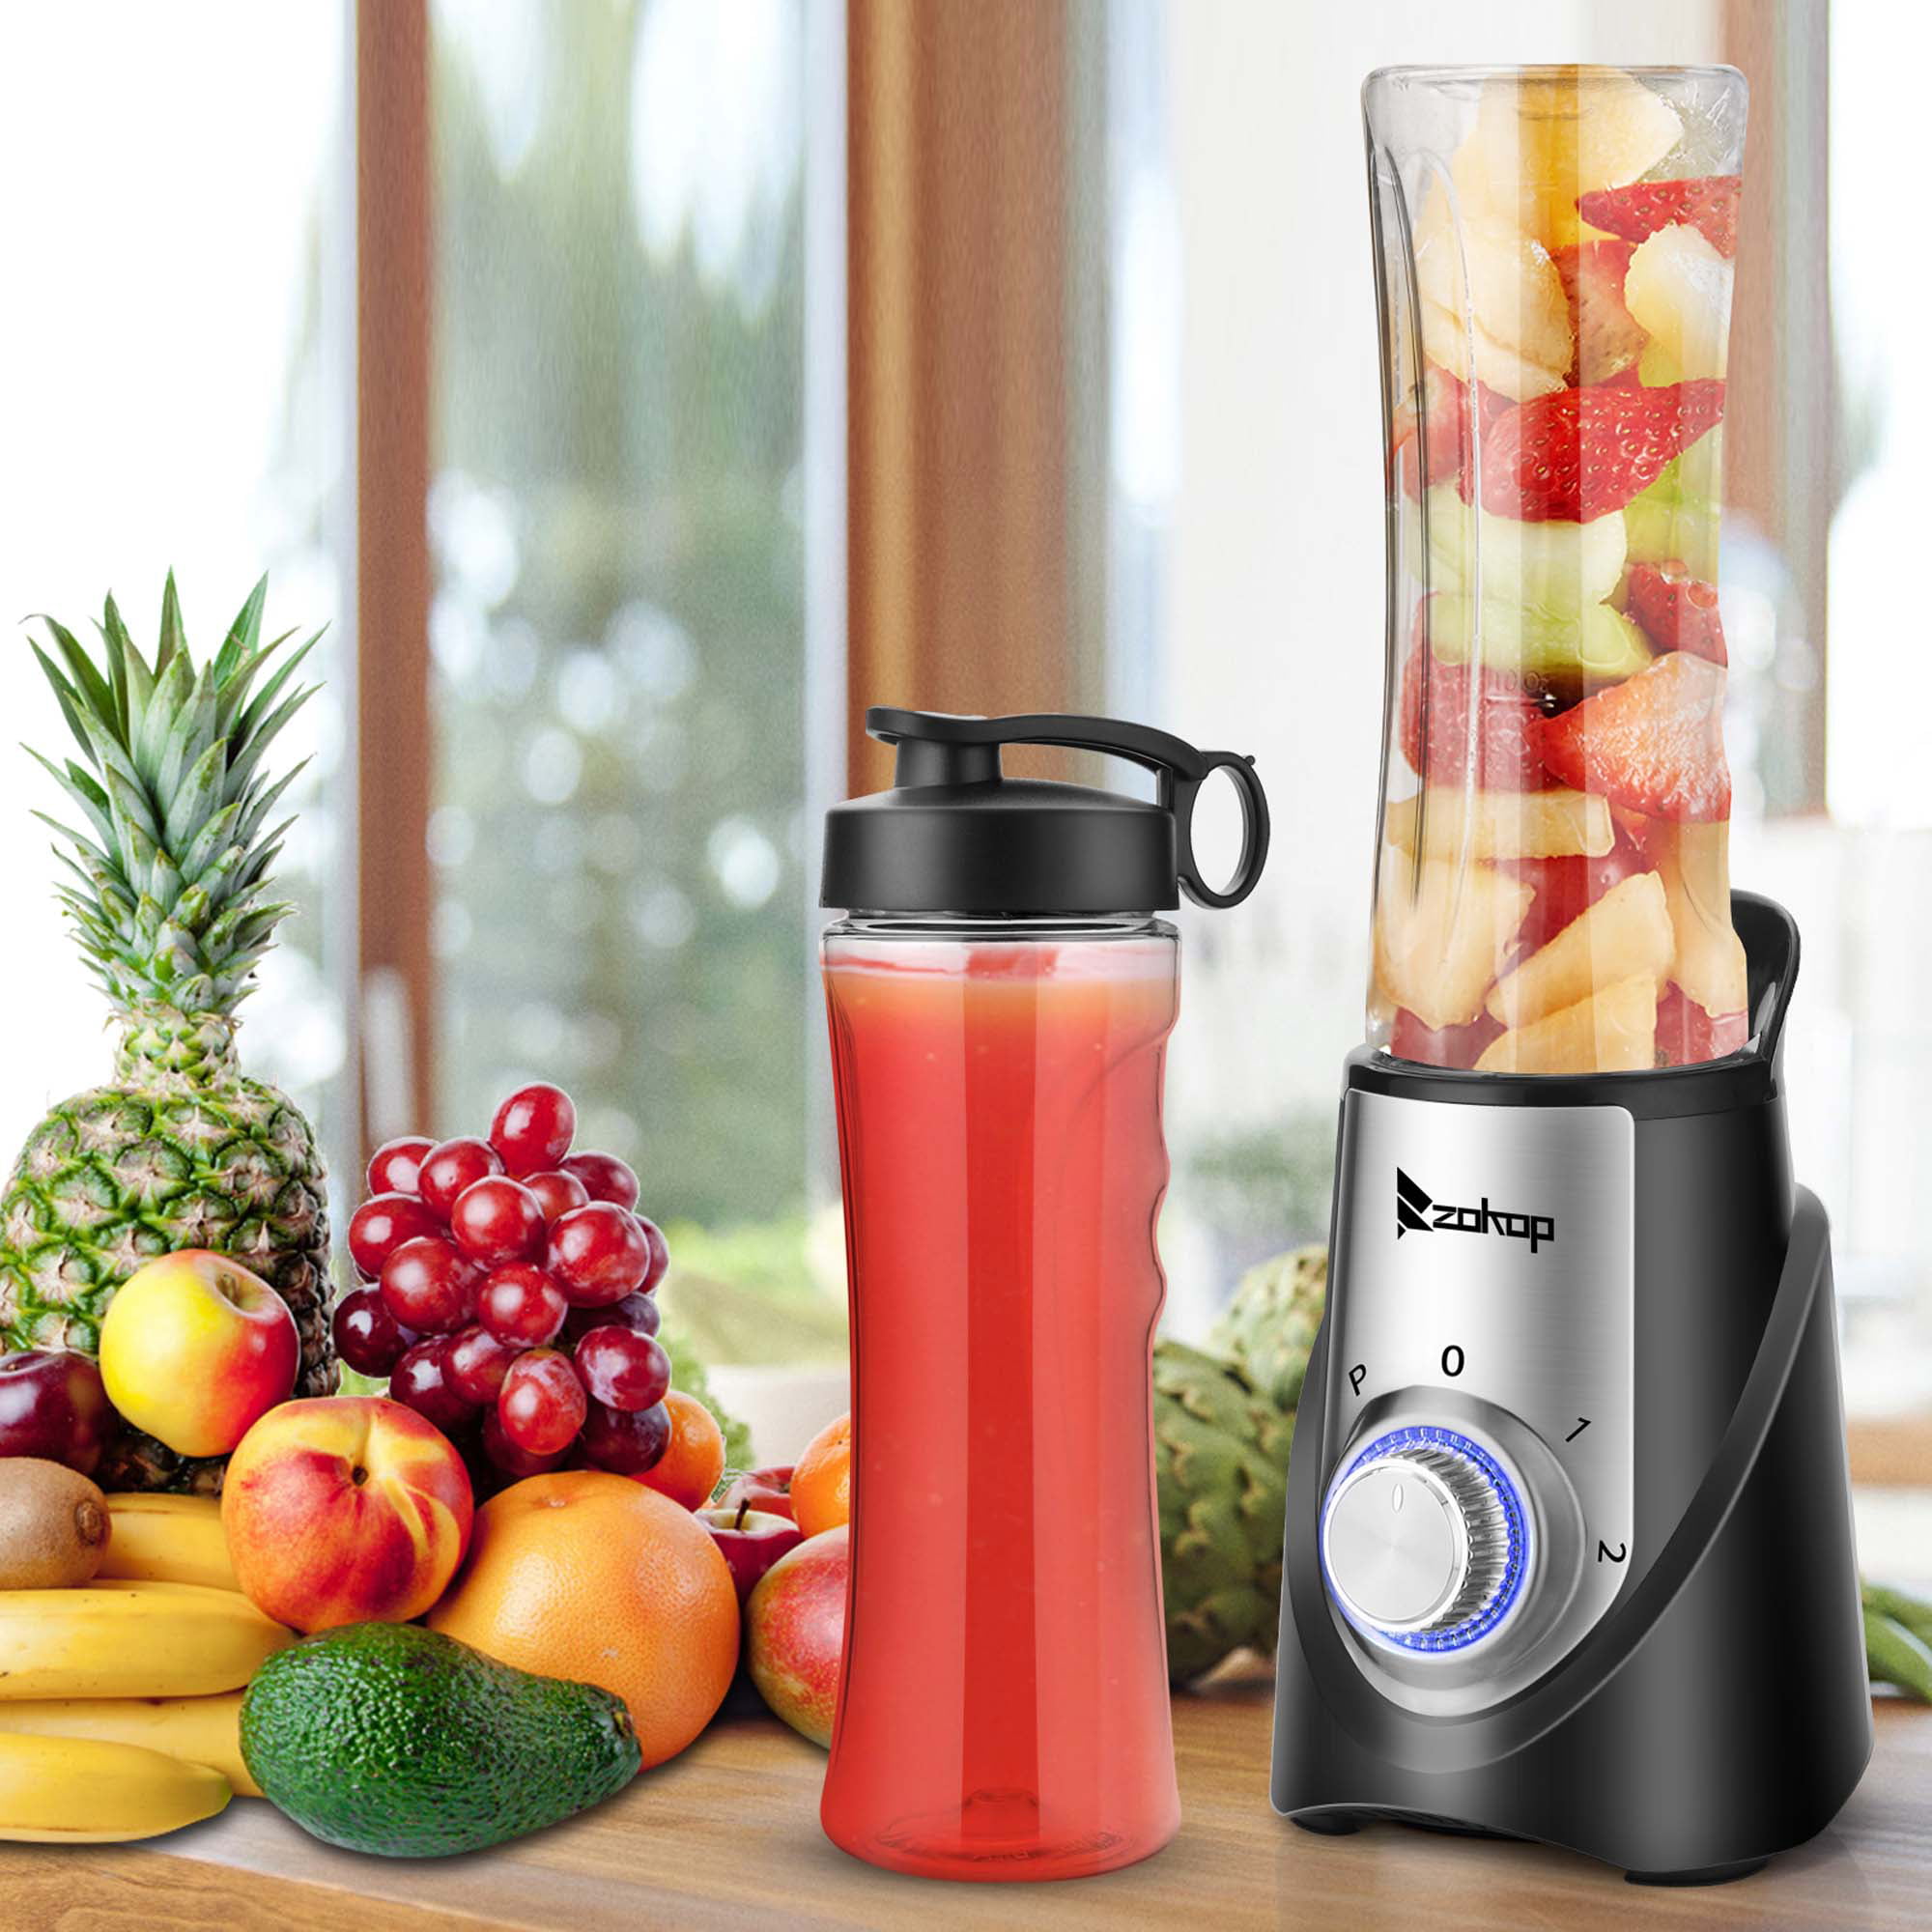 Portable Smoothie Blender with 2 x 20oz Travel Bottle Personal Blender by Yabano 500W Single Serve Blender with Grinder Cup for Shakes and Smoothies BPA free